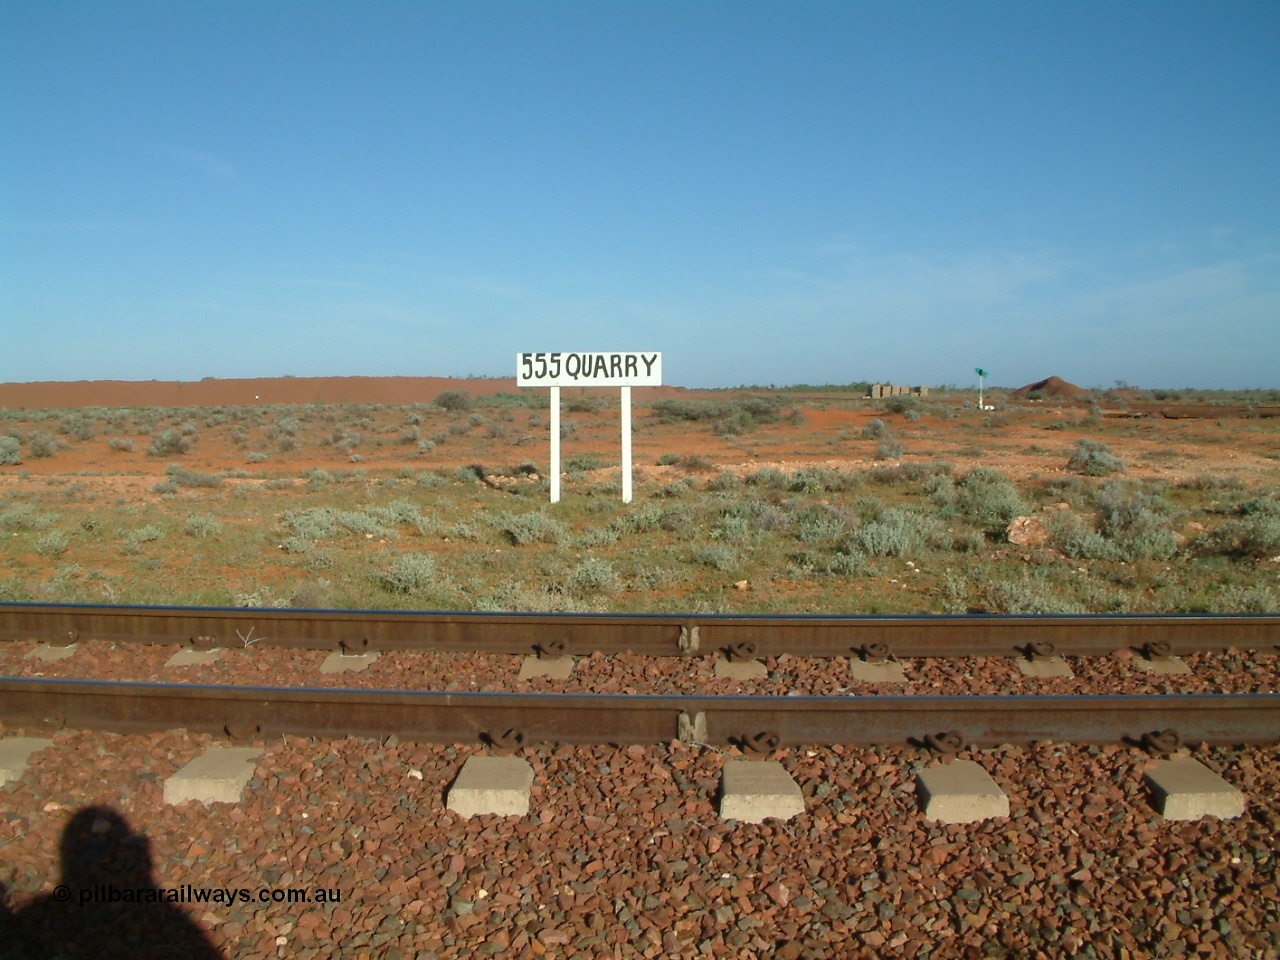 030416 082046
555 Quarry, which is located at the 554.8 km from the 0 km datum from Coonamia or just 50 km from Tarcoola. Looking west across the mainline, siding can be seen on the right. Siding nameboard. [url=https://goo.gl/maps/8L1dSkj8dde4Tk5Q6]GeoData location[/url]. 16th April 2003.
